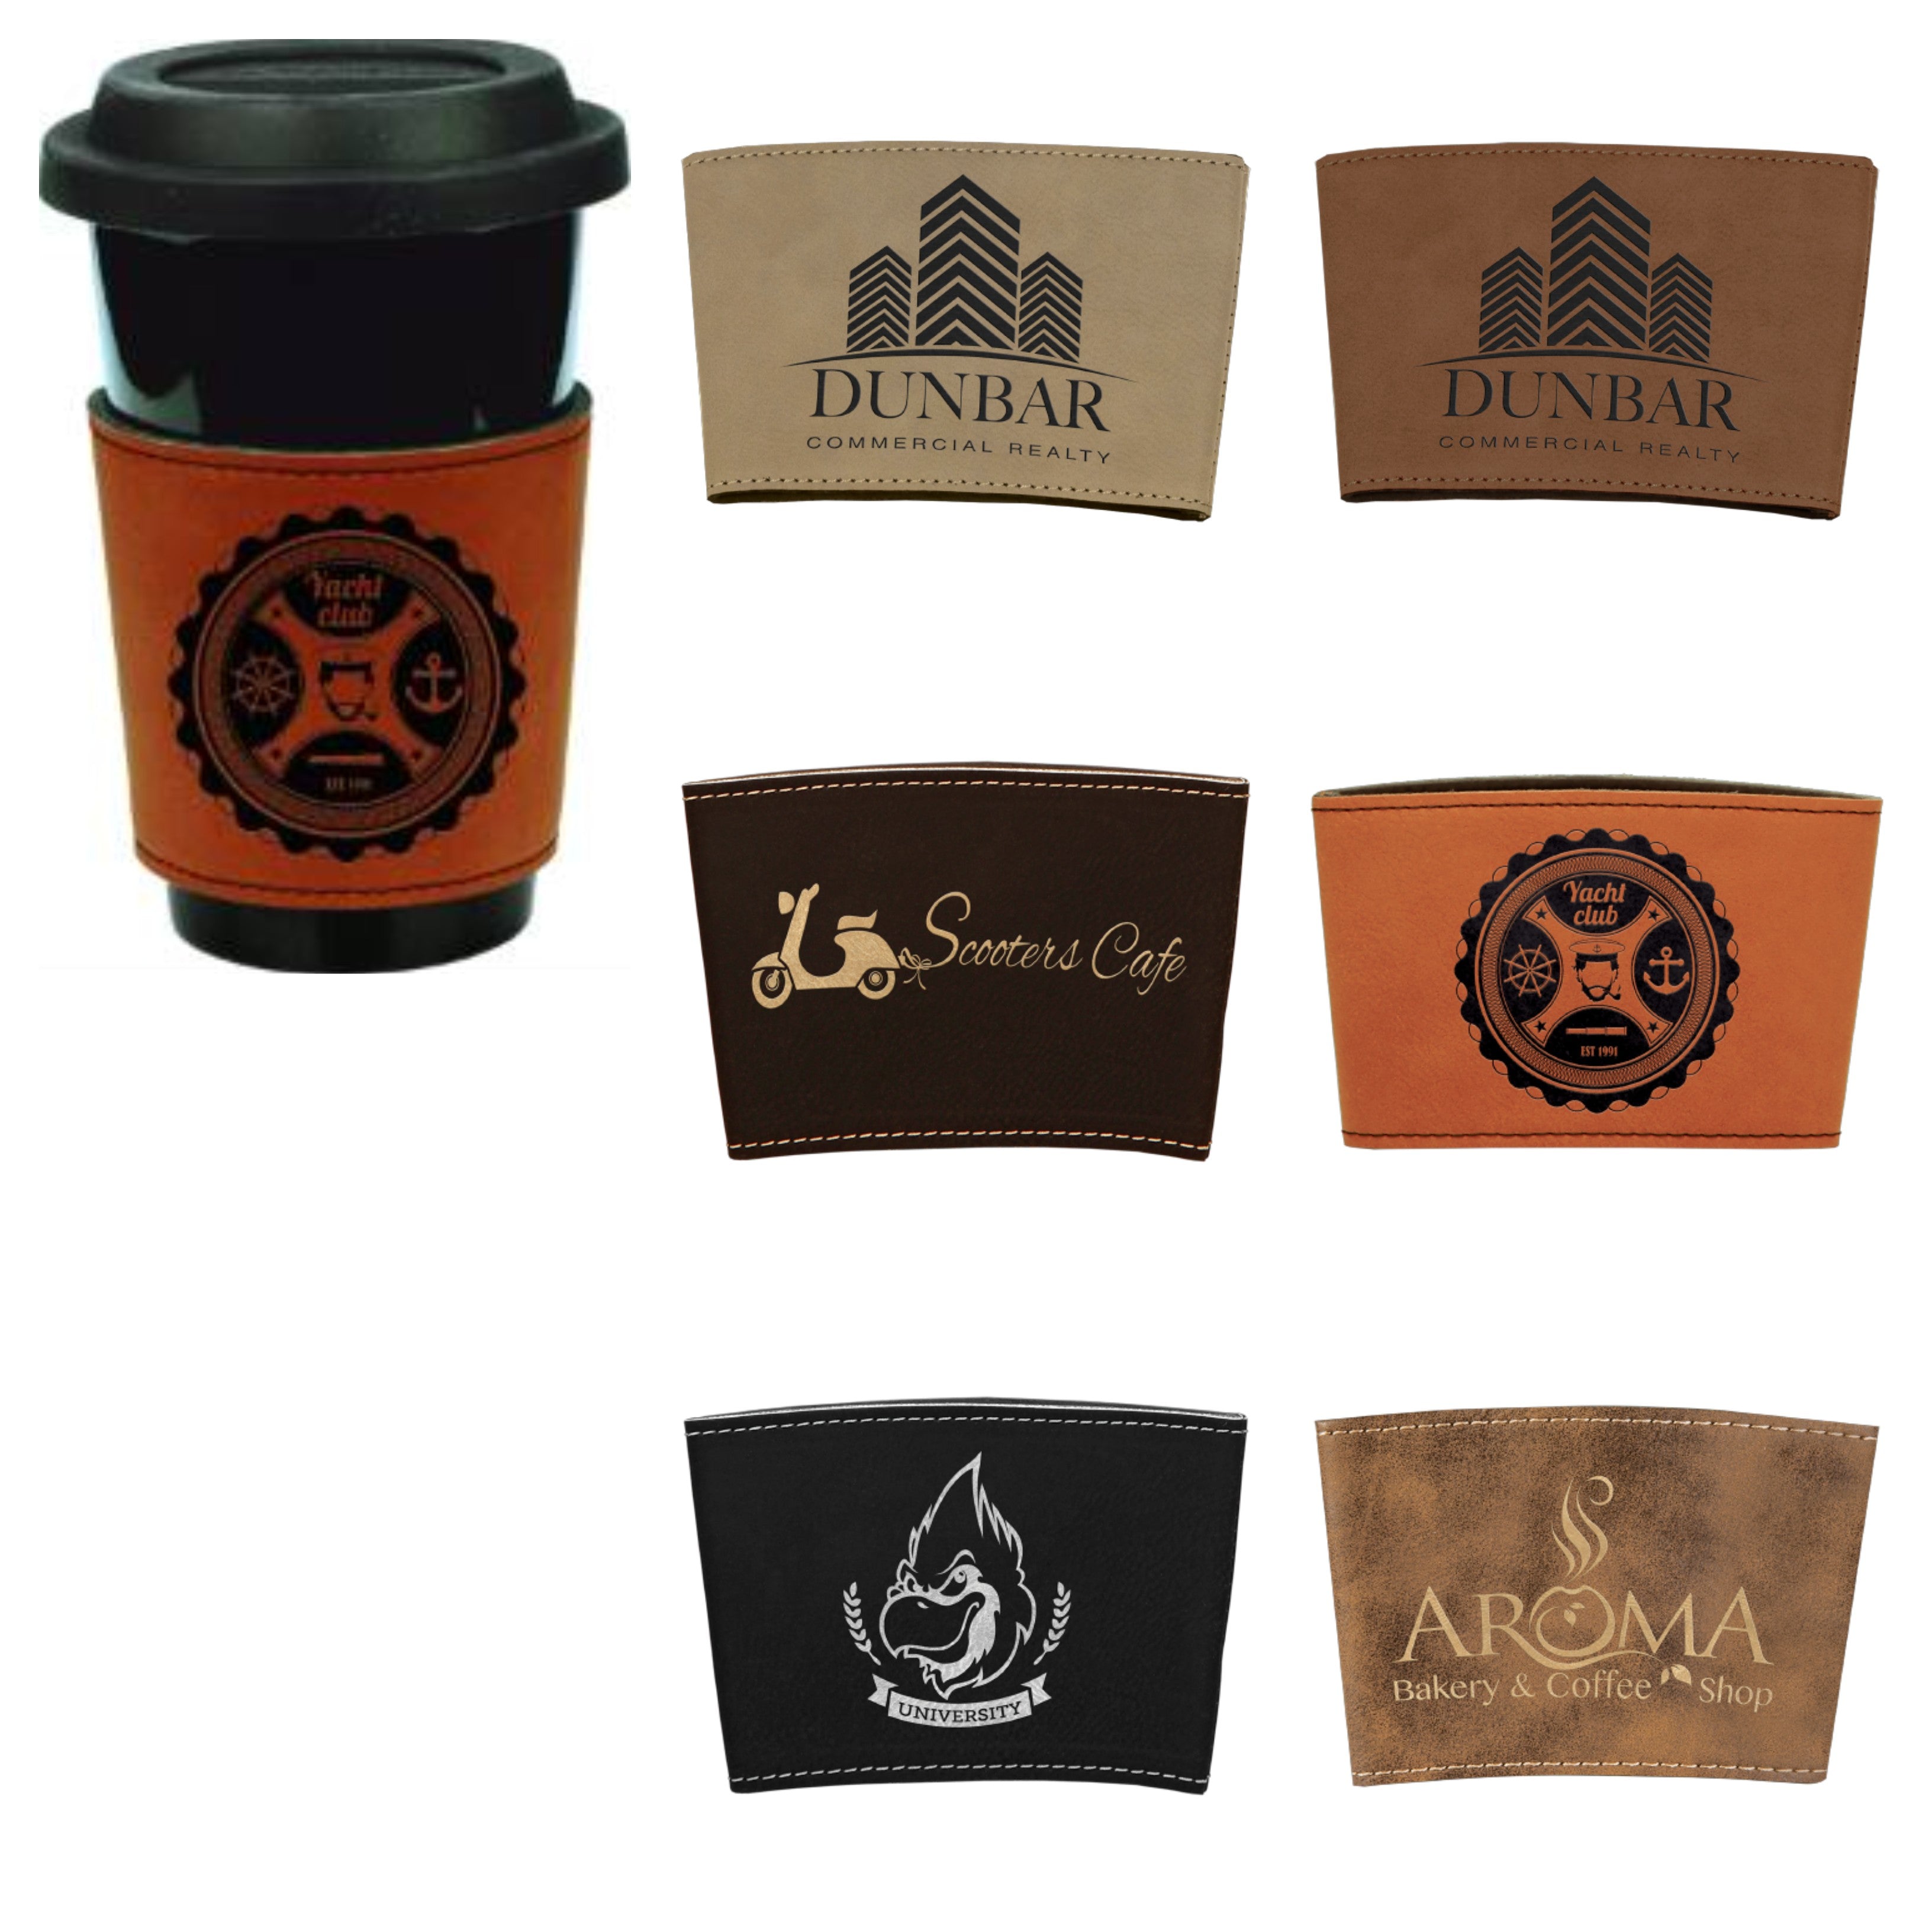 Personalized Coffee Cup Sleeve in Horween Leather for BRCC